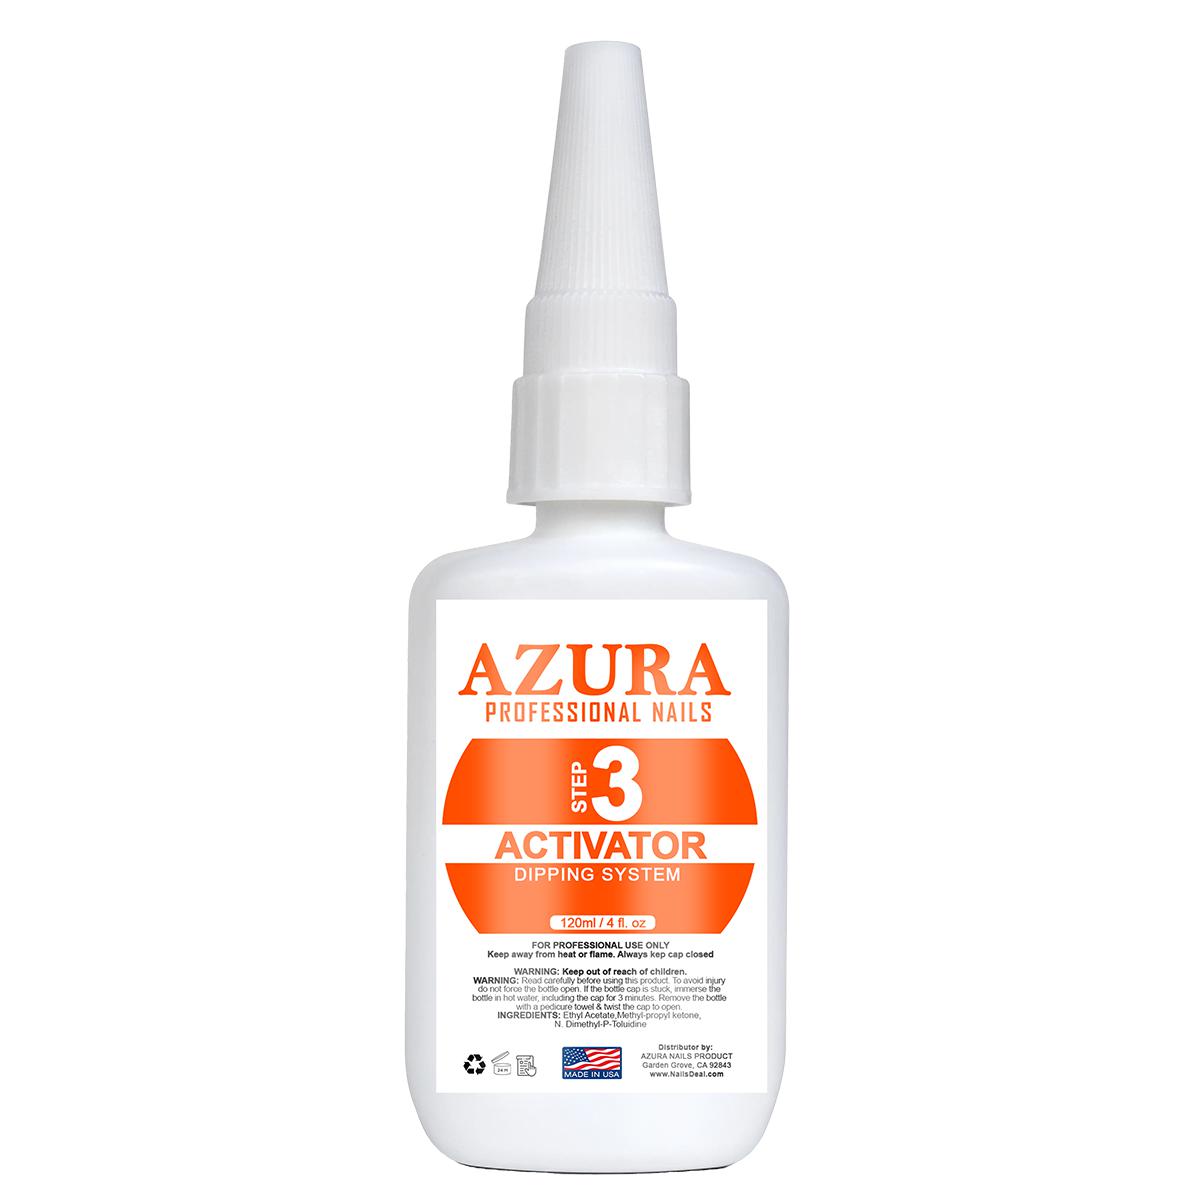 AZURA Dipping Essential - Seal Dip - Refill (4oz/120ml) for Dipping Manicures-AZURA- Nail Supply American Gel Polish - Phuong Ni